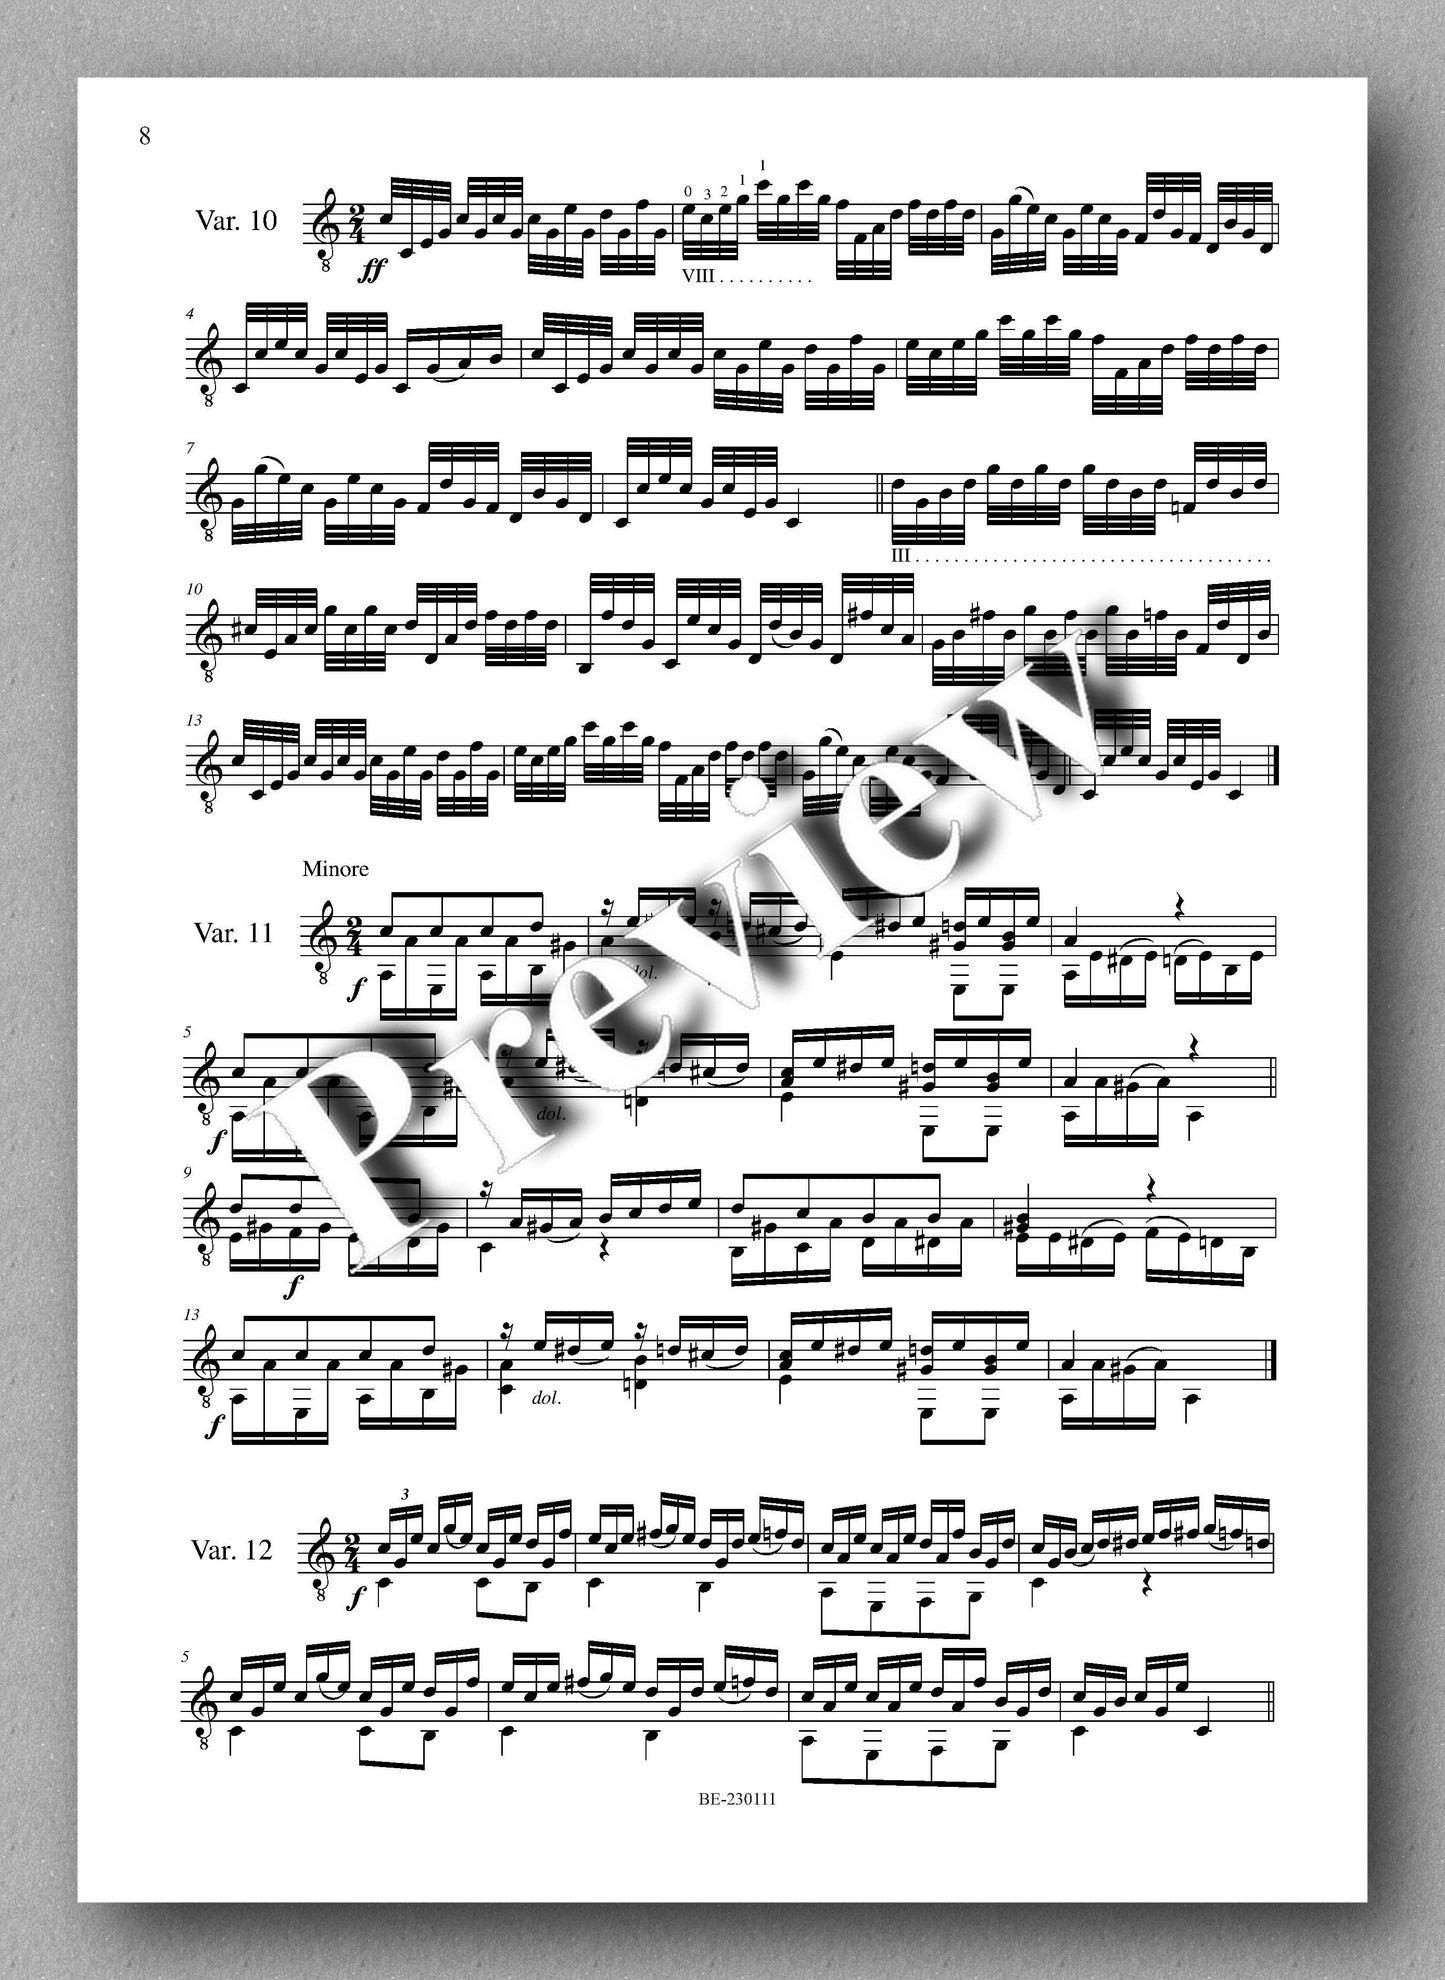 Molino, Collected Works for Guitar Solo, Vol. 23 - preview of the muisic score 2